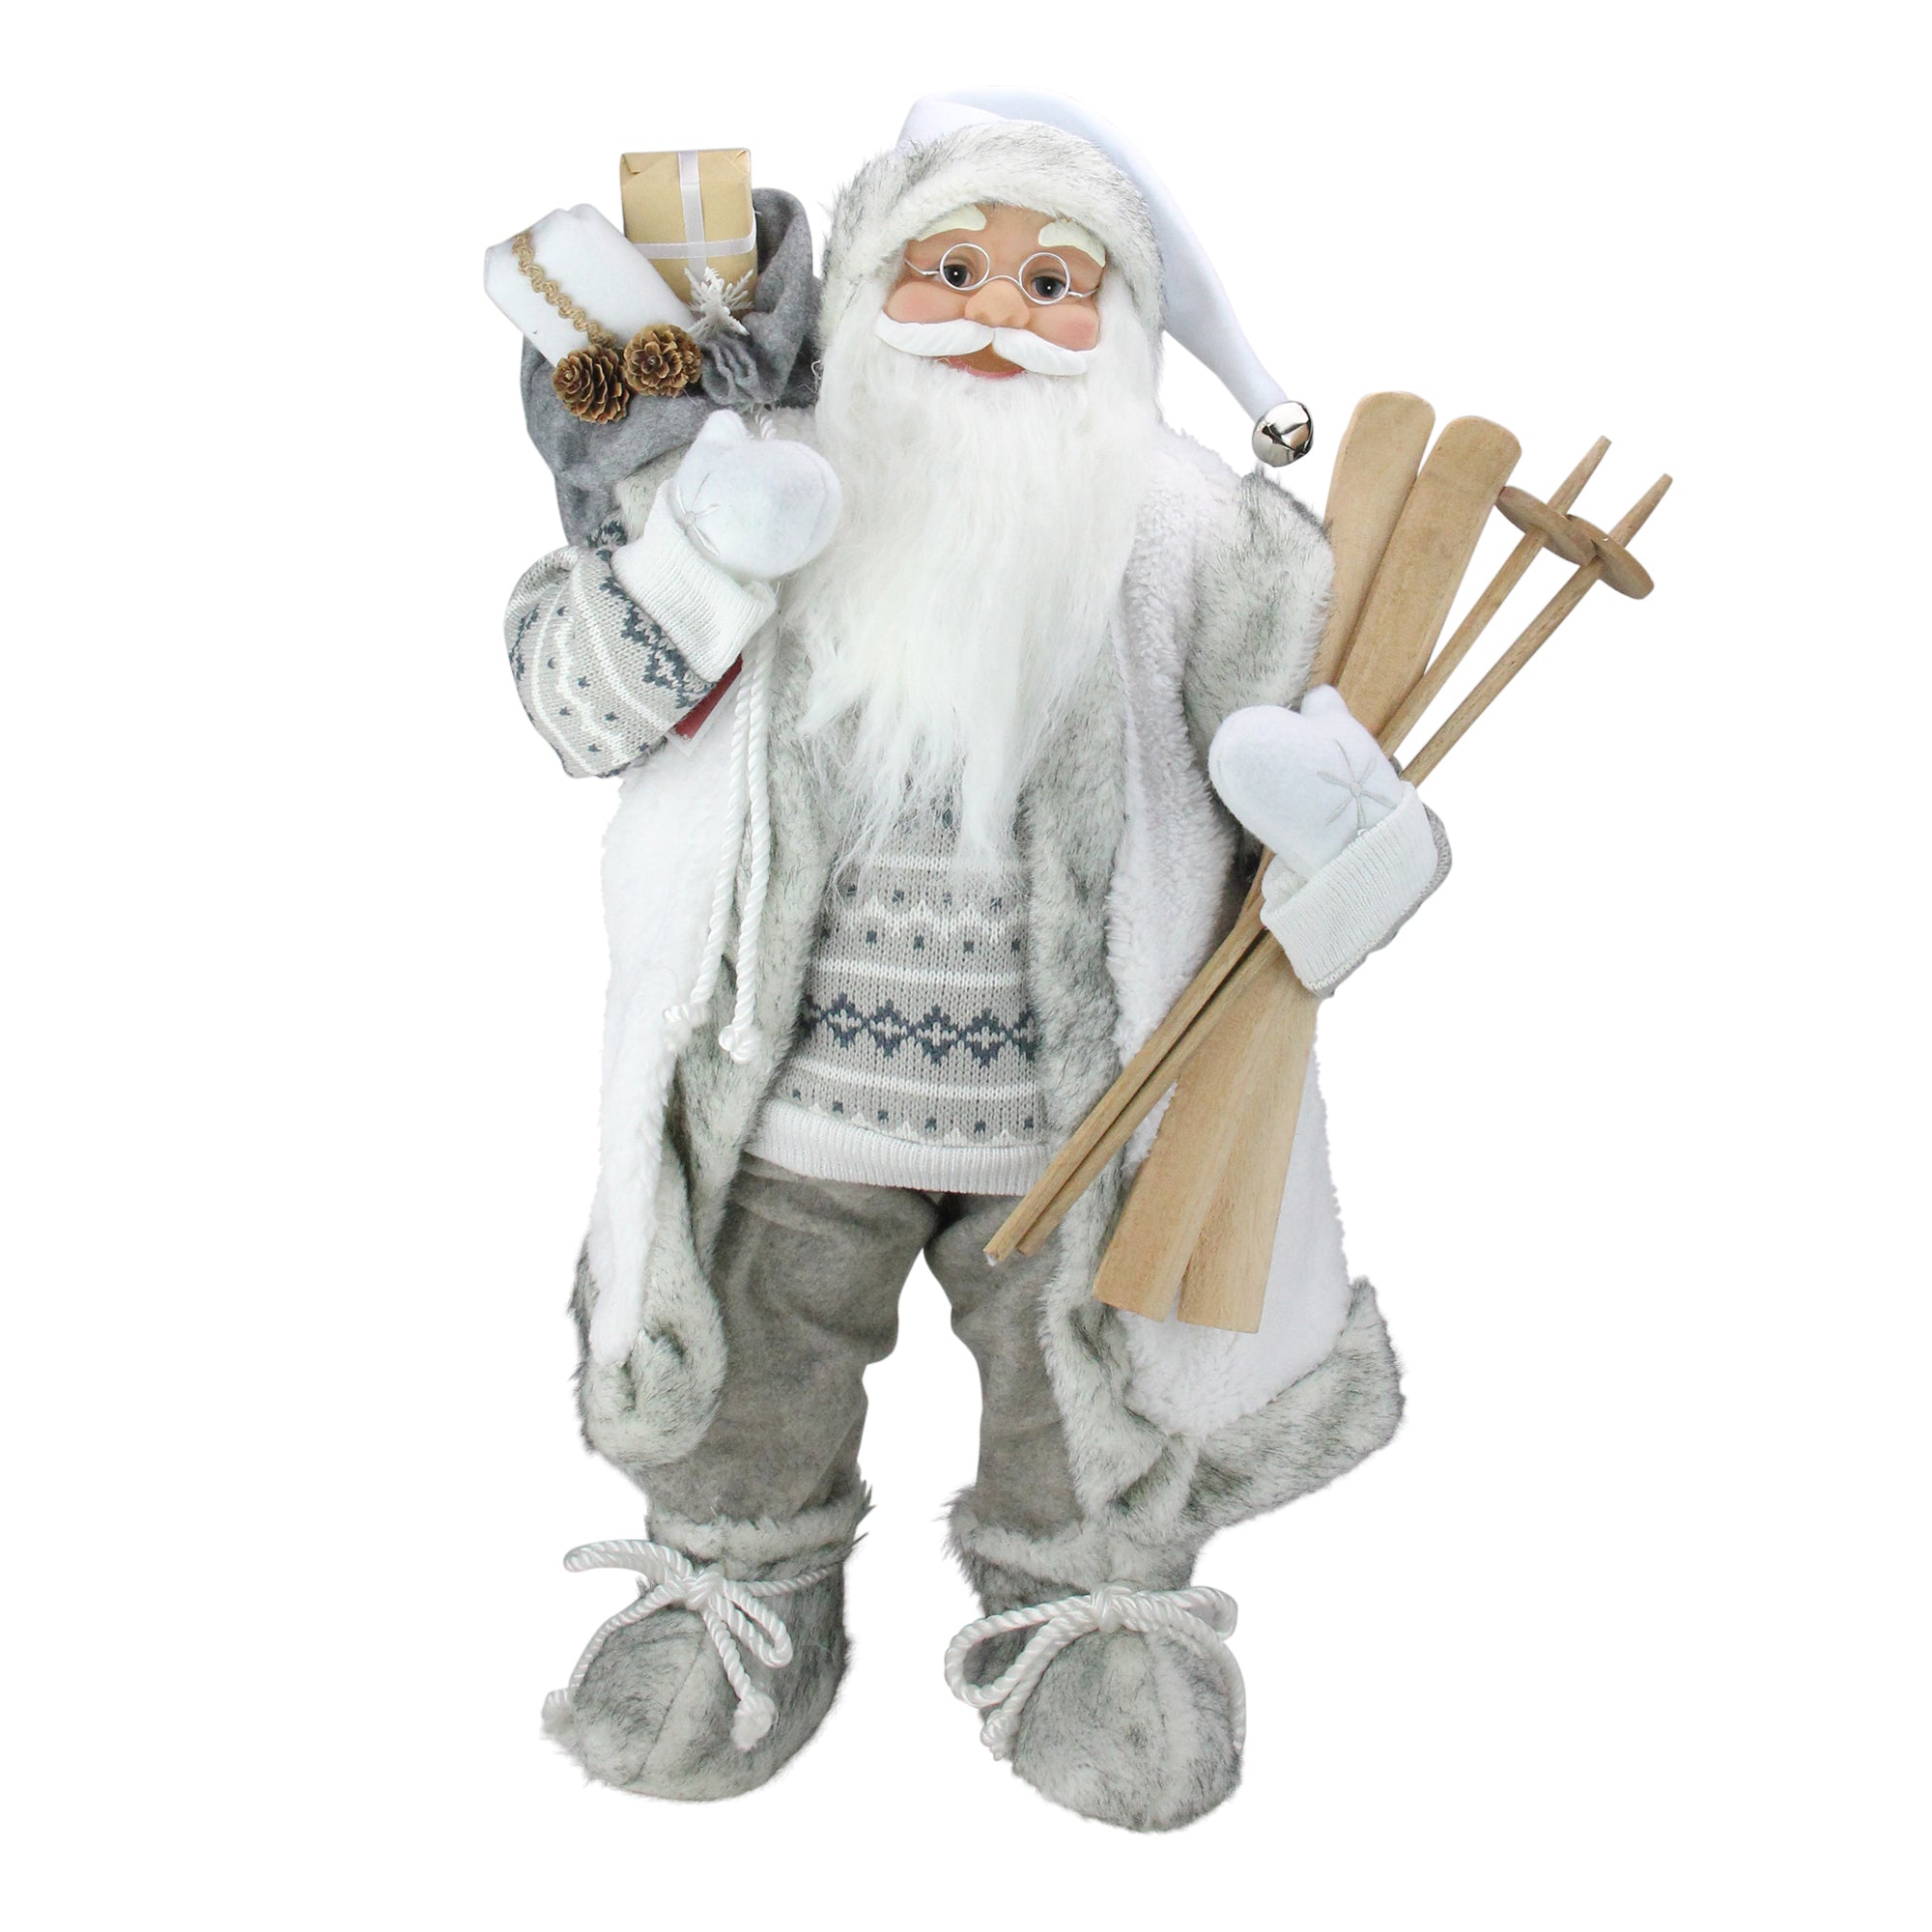 24" Classic Skiing Pure White and Gray Standing Santa Claus Christmas Figure